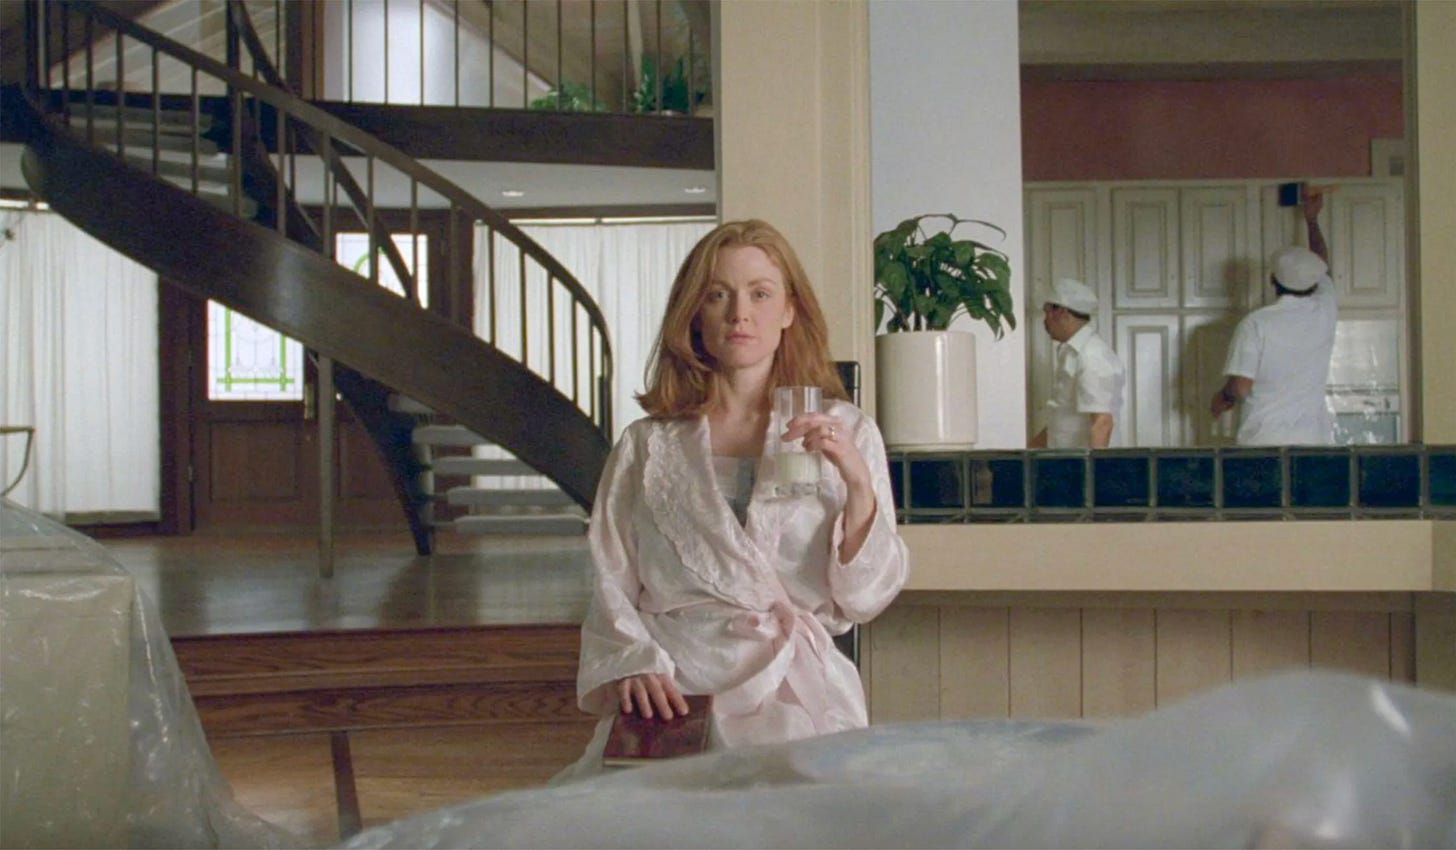 A white woman with long red hair wearing a pink nightgown sits staring into the distance. She has a book on her lap and is holding a glass of milk up with one hand. She’s sat in a large house with a spiral staircase behind, painters renovating and covers still on the furniture.